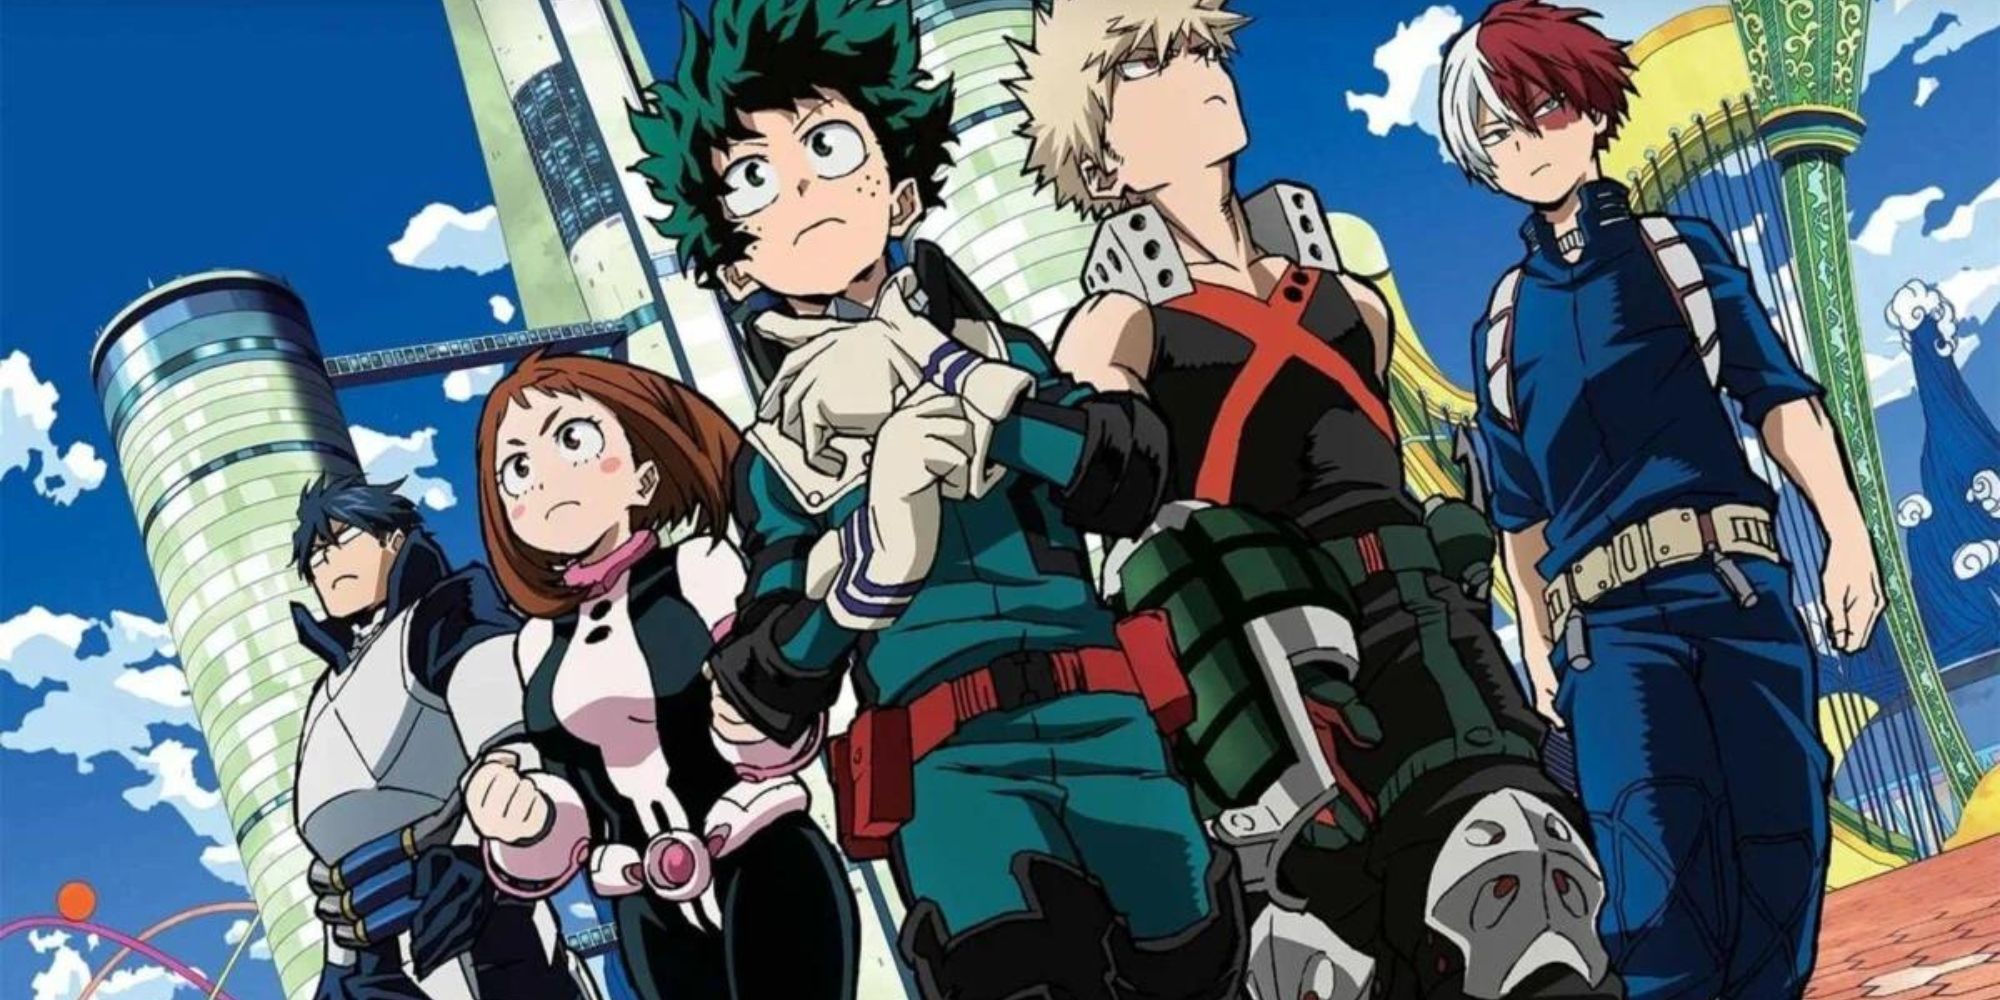 When will the My Hero Academia anime and manga end?